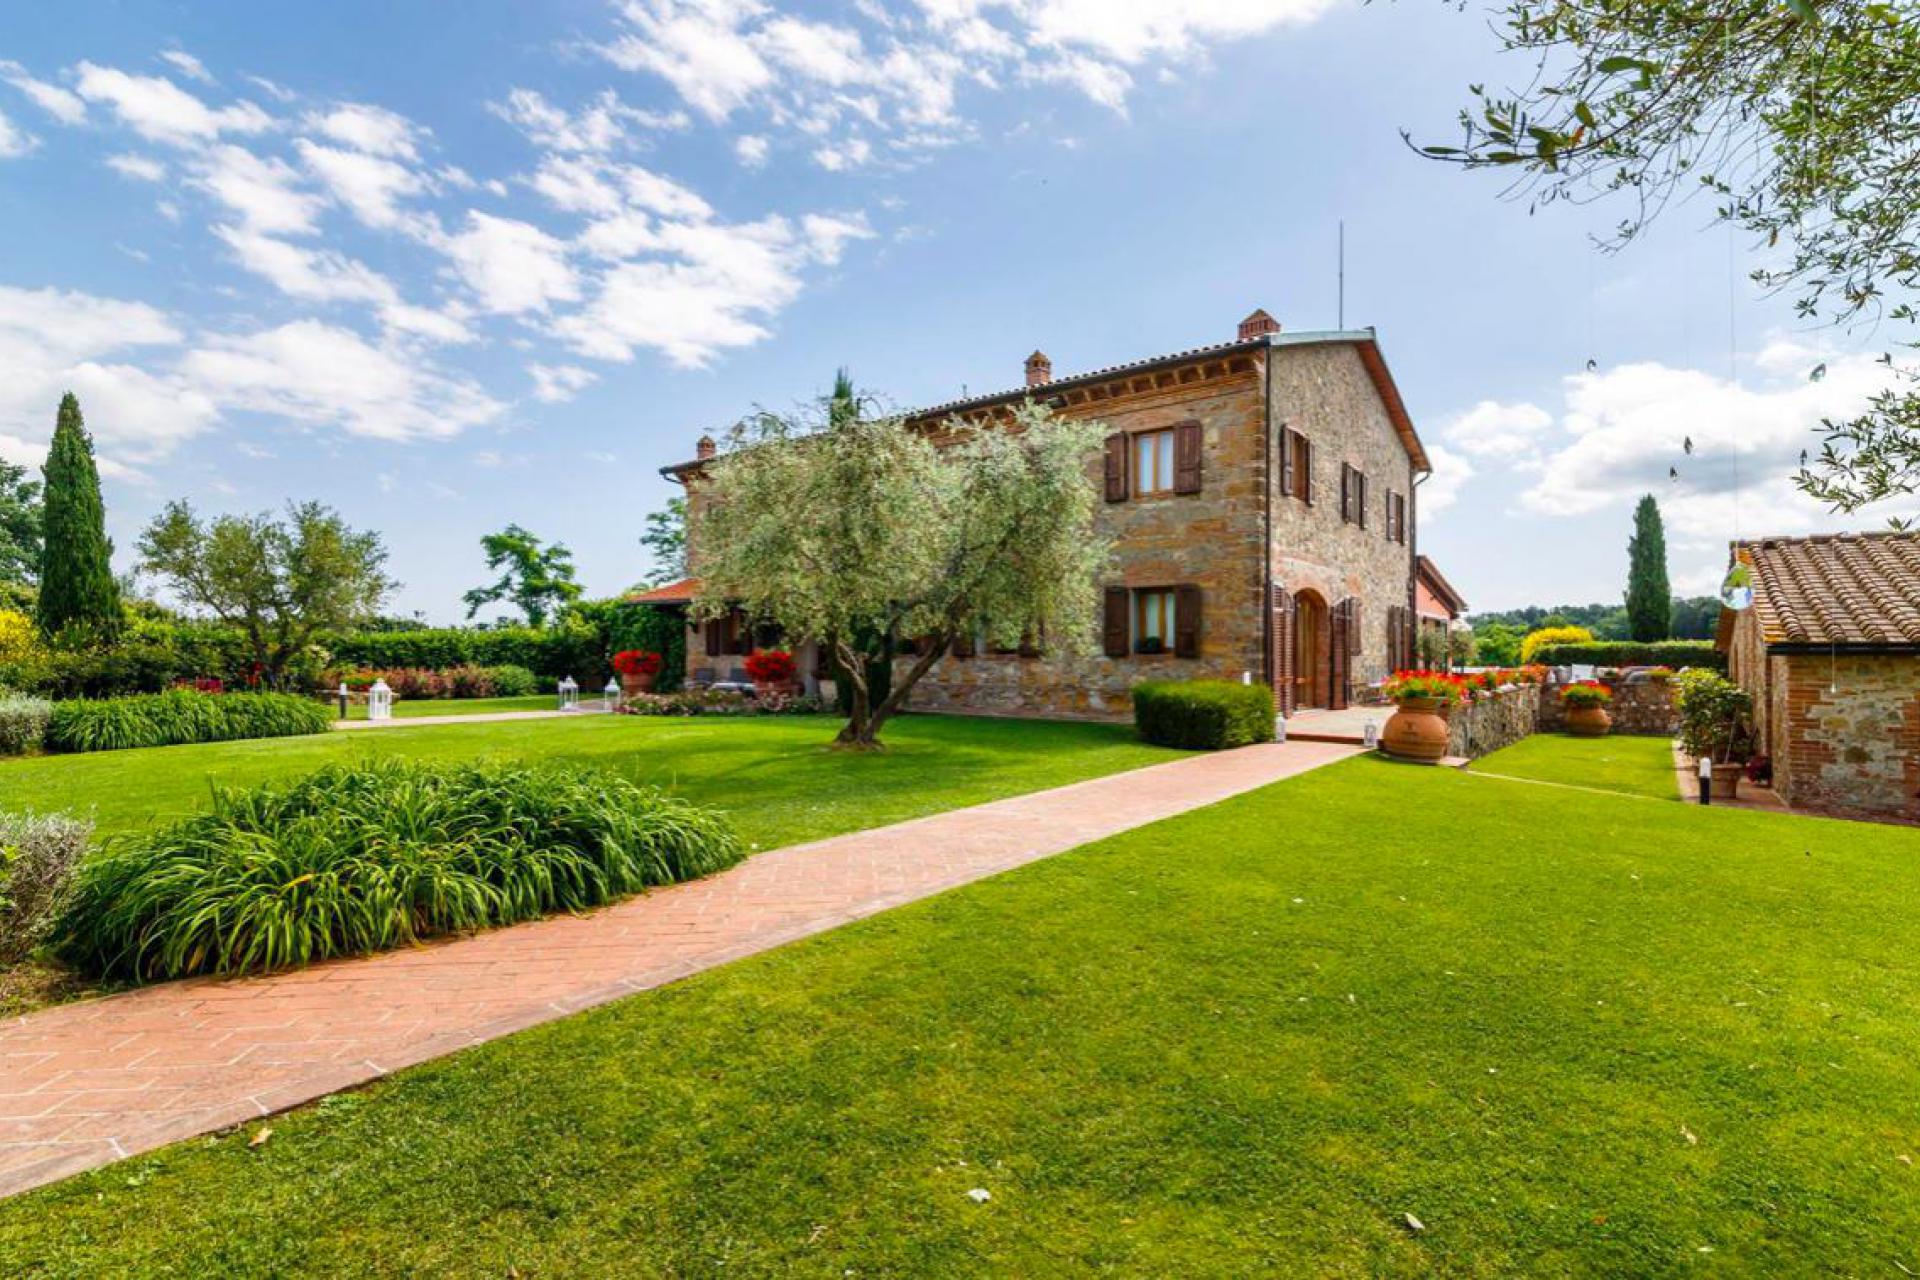 Large agriturismo in Tuscany with stunning views